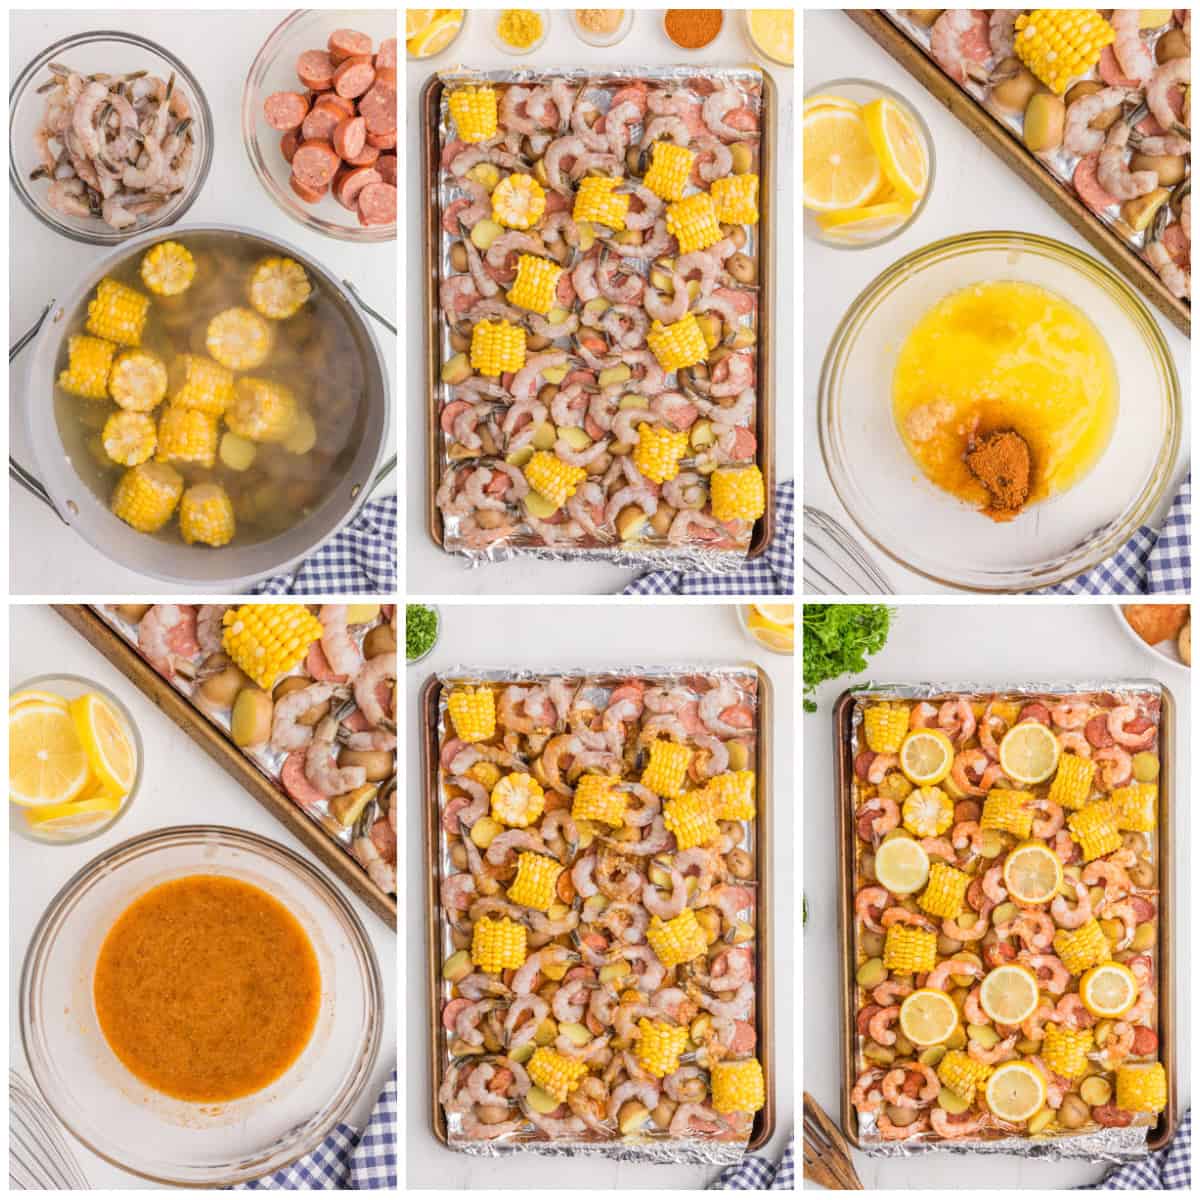 Step by step photos on how to make a Sheet Pan Shrimp Boil.